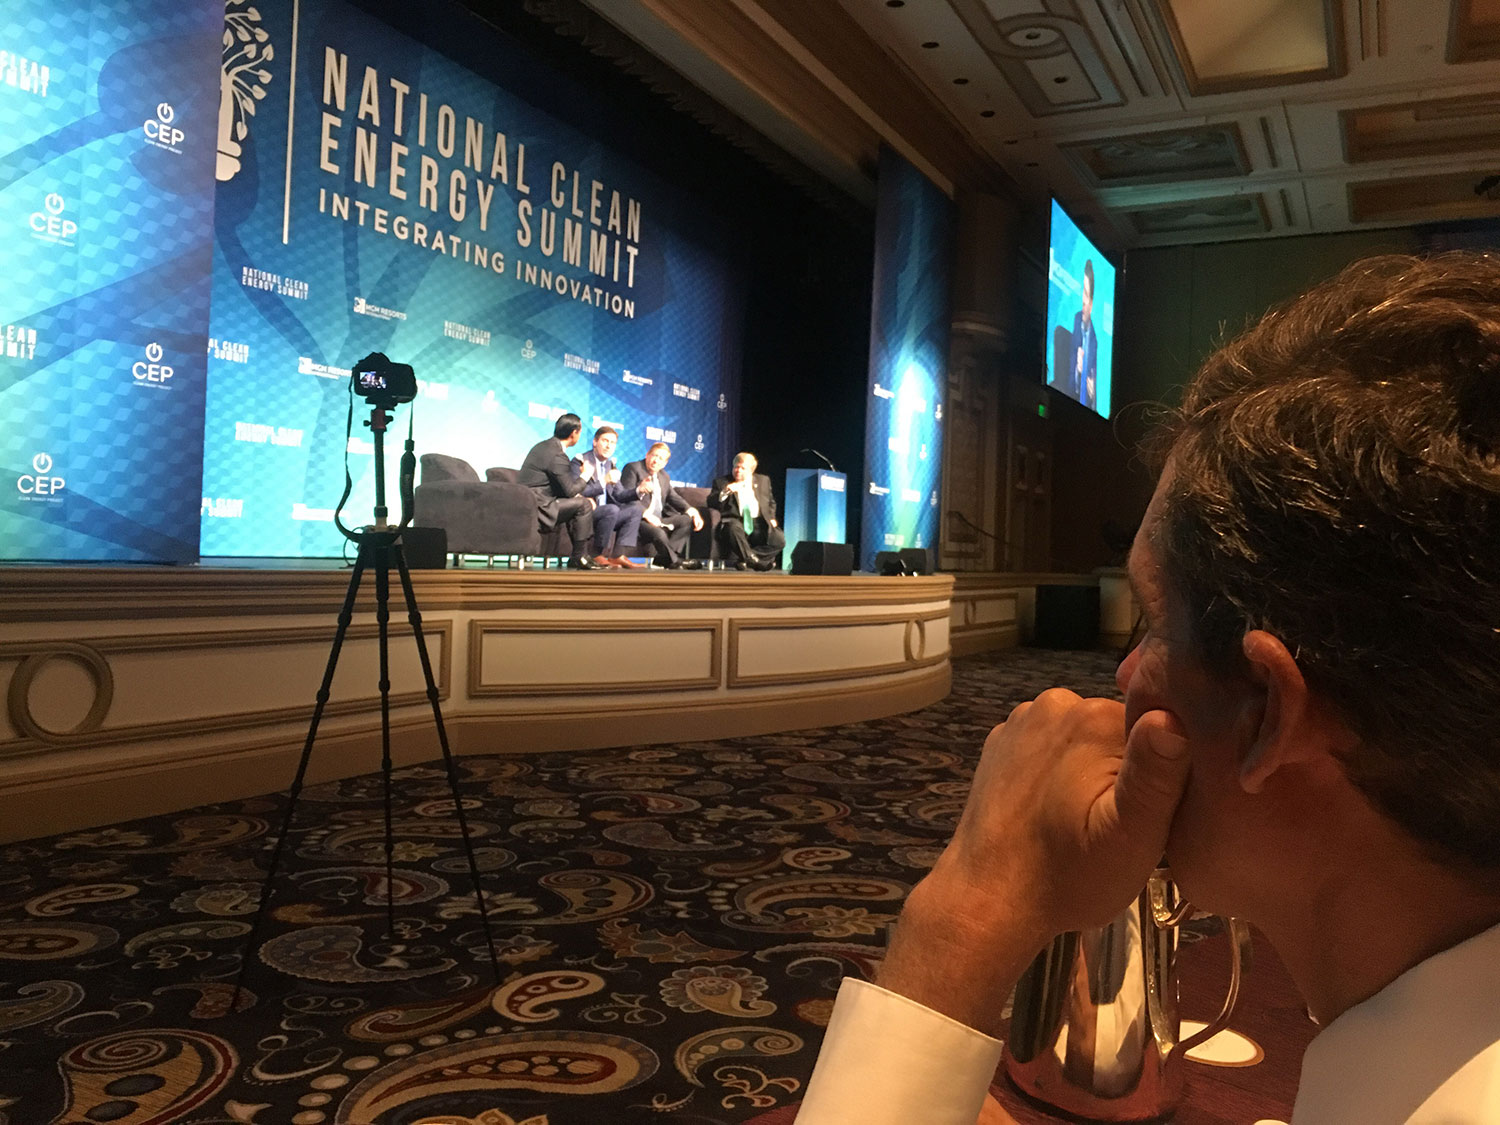 Jared listening to speakers at the Clean Energy Summit